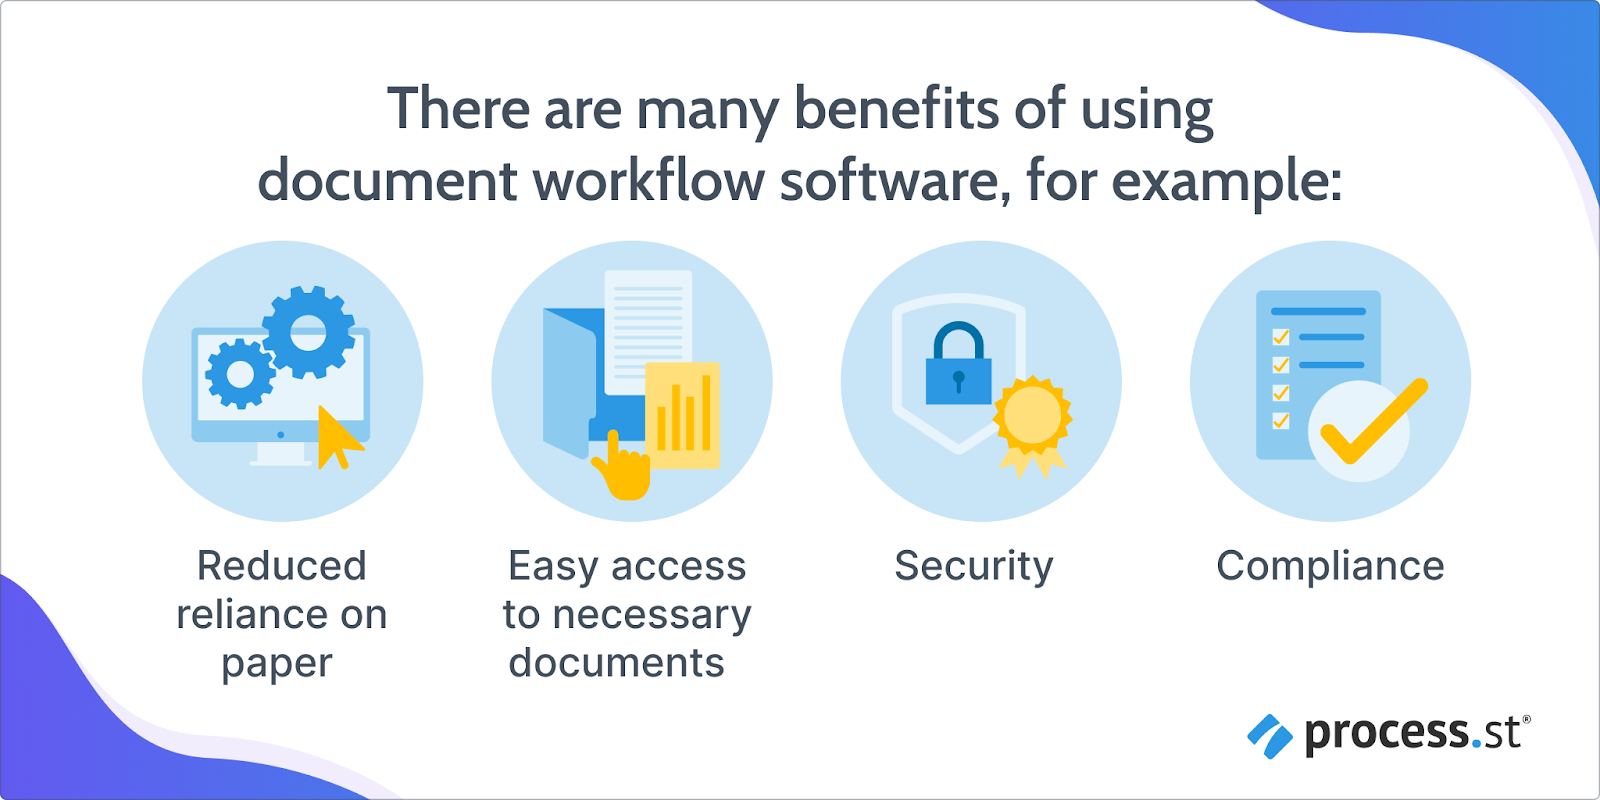 Image showing the benefits of using document workflow software